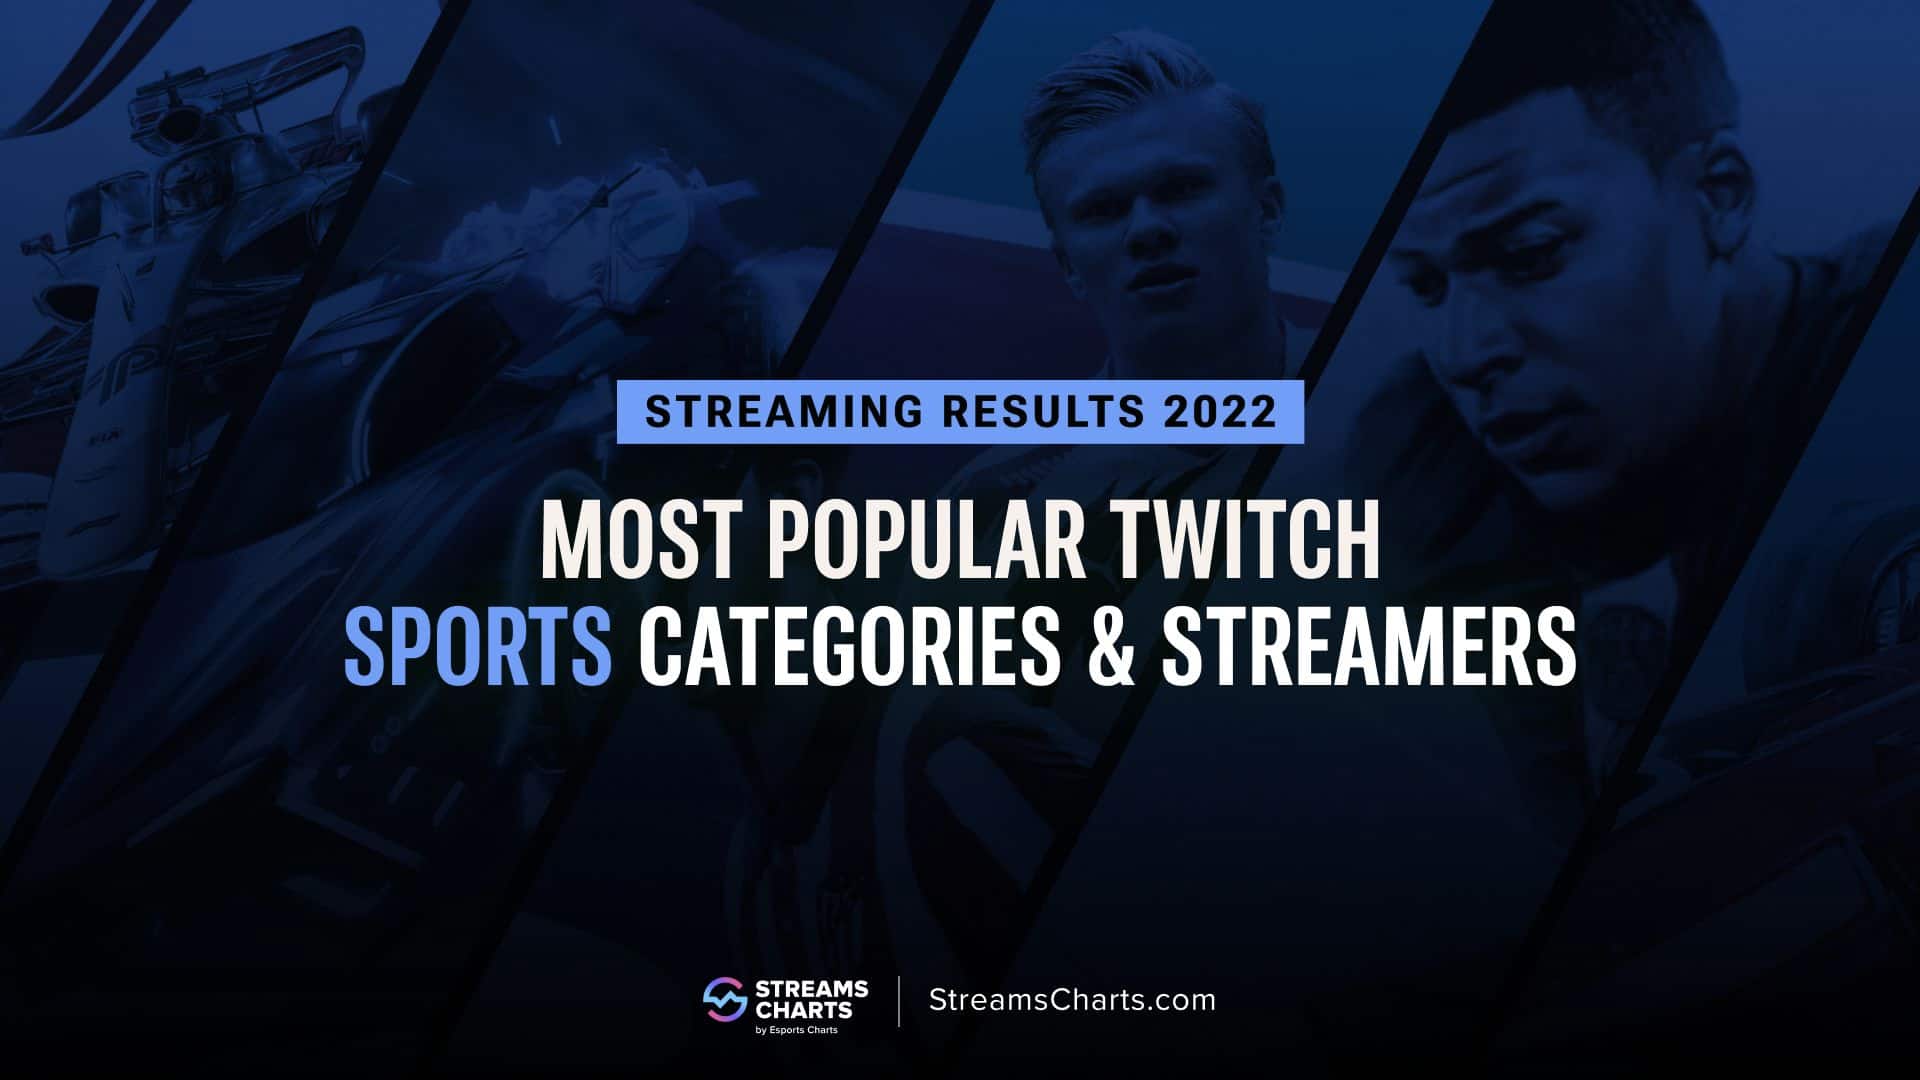 FIFA 23: How popular is the game on Twitch and other streaming platforms?